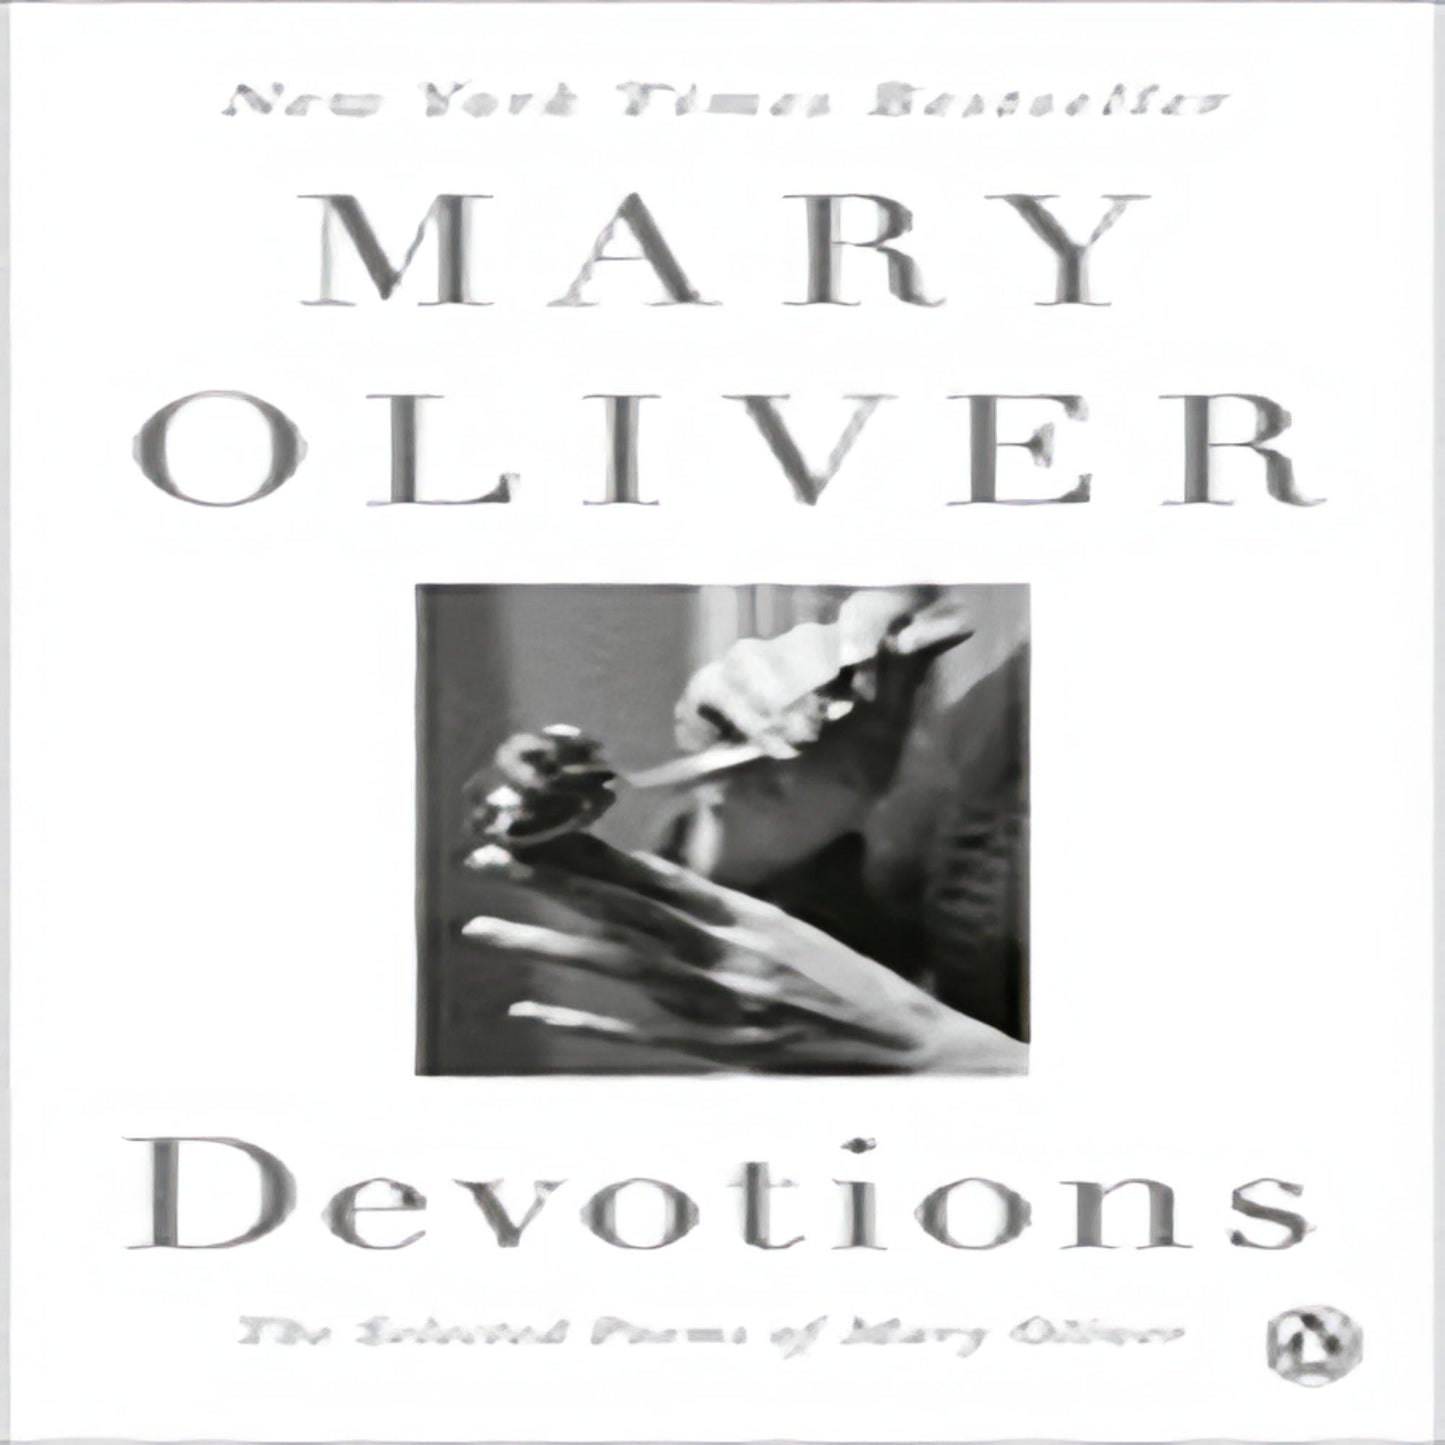 Devotions: The Selected Poems of Mary Oliver188-030123-0399563261DPGBOOKSTORE.COM. Today's Bestsellers.